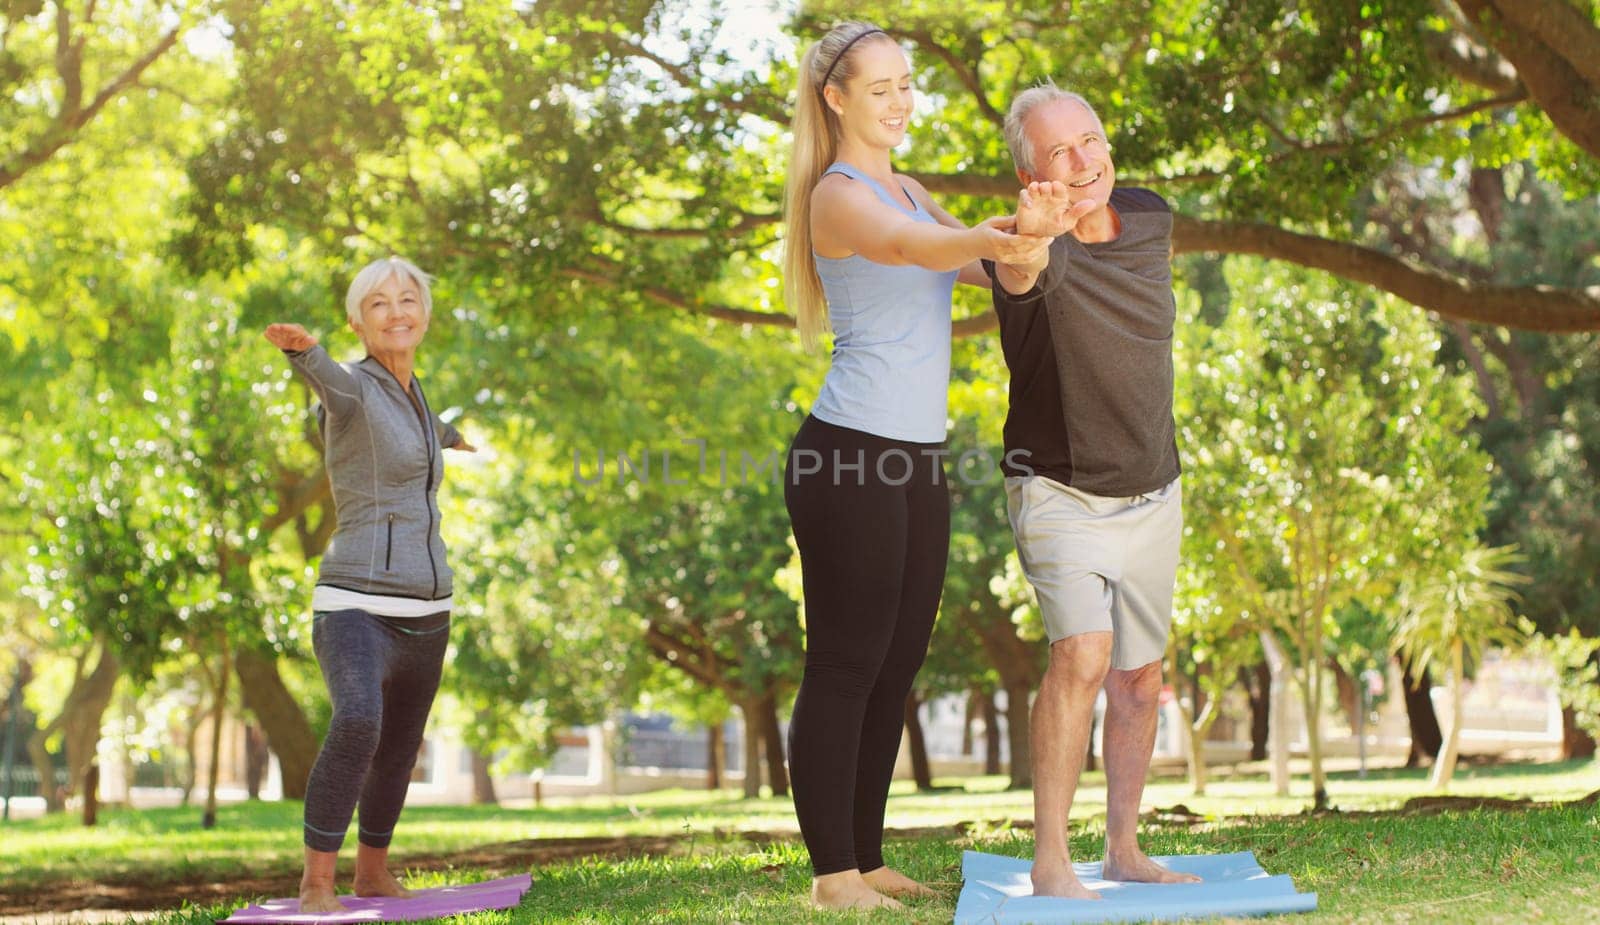 Yoga, wellness and an old couple with their personal trainer in a park for a health or active lifestyle. Exercise, fitness or zen and senior people outdoor for a workout with their pilates coach.